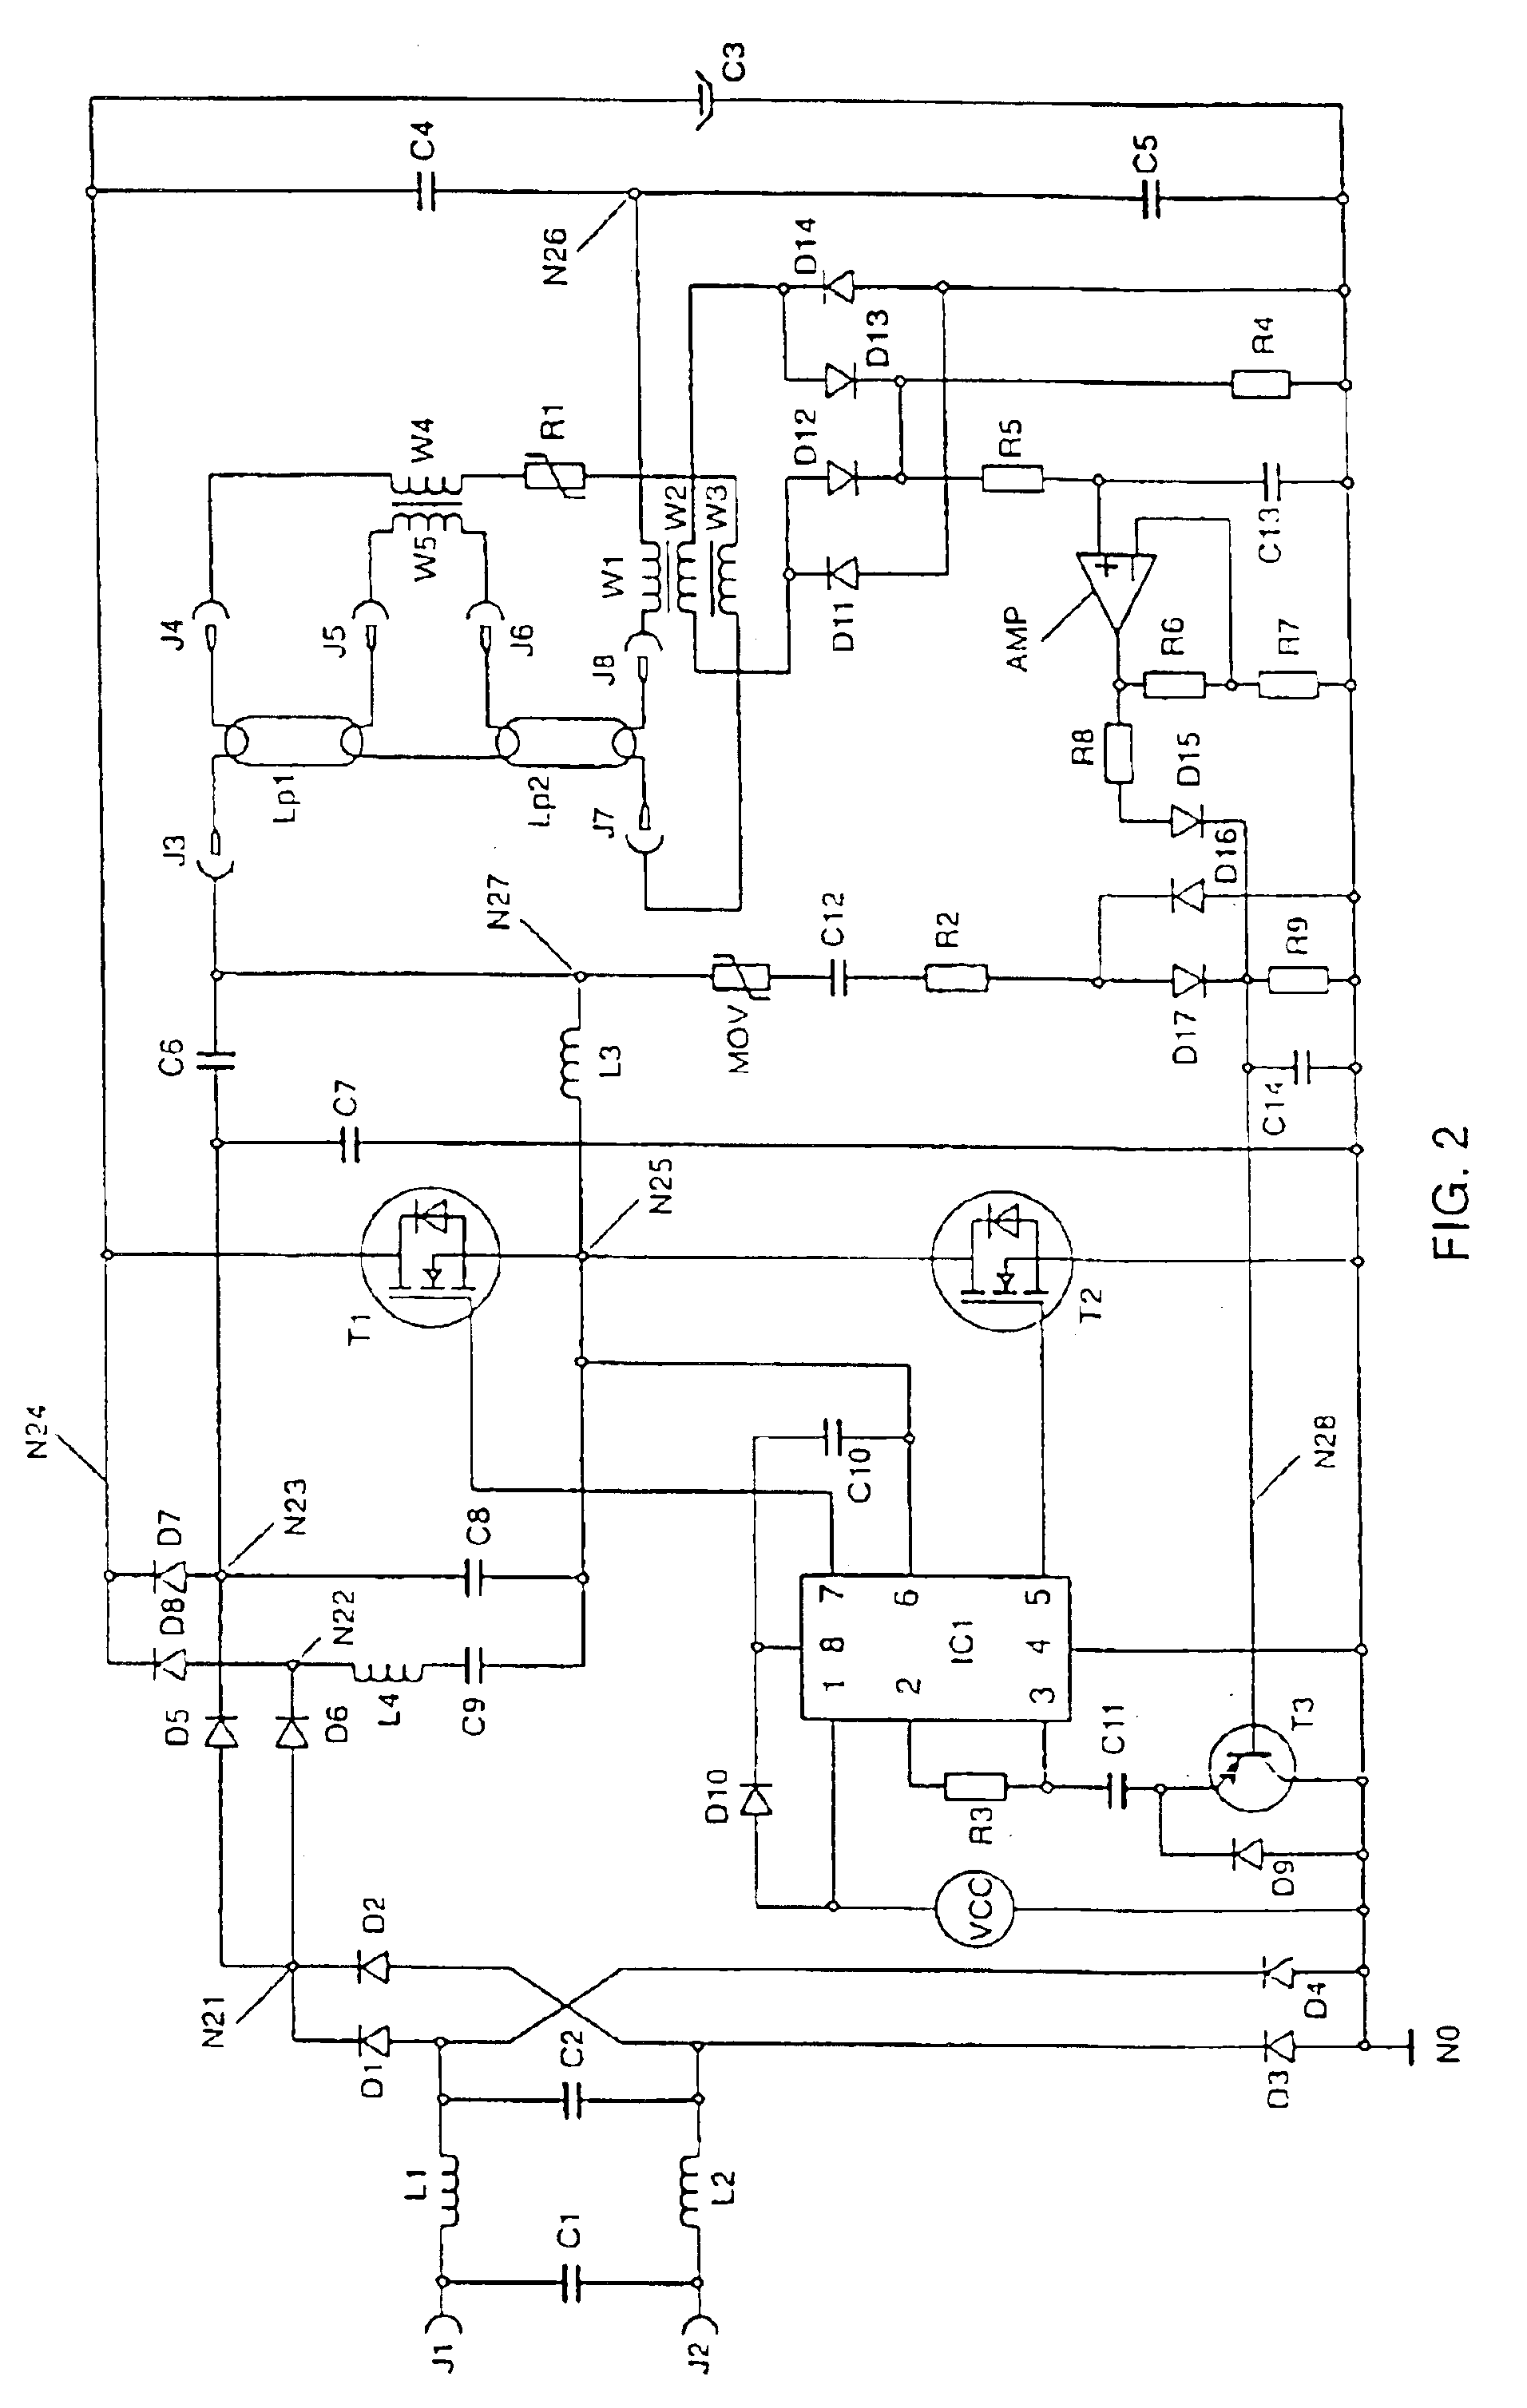 Circuit arrangement and method for starting and operating discharge lamps